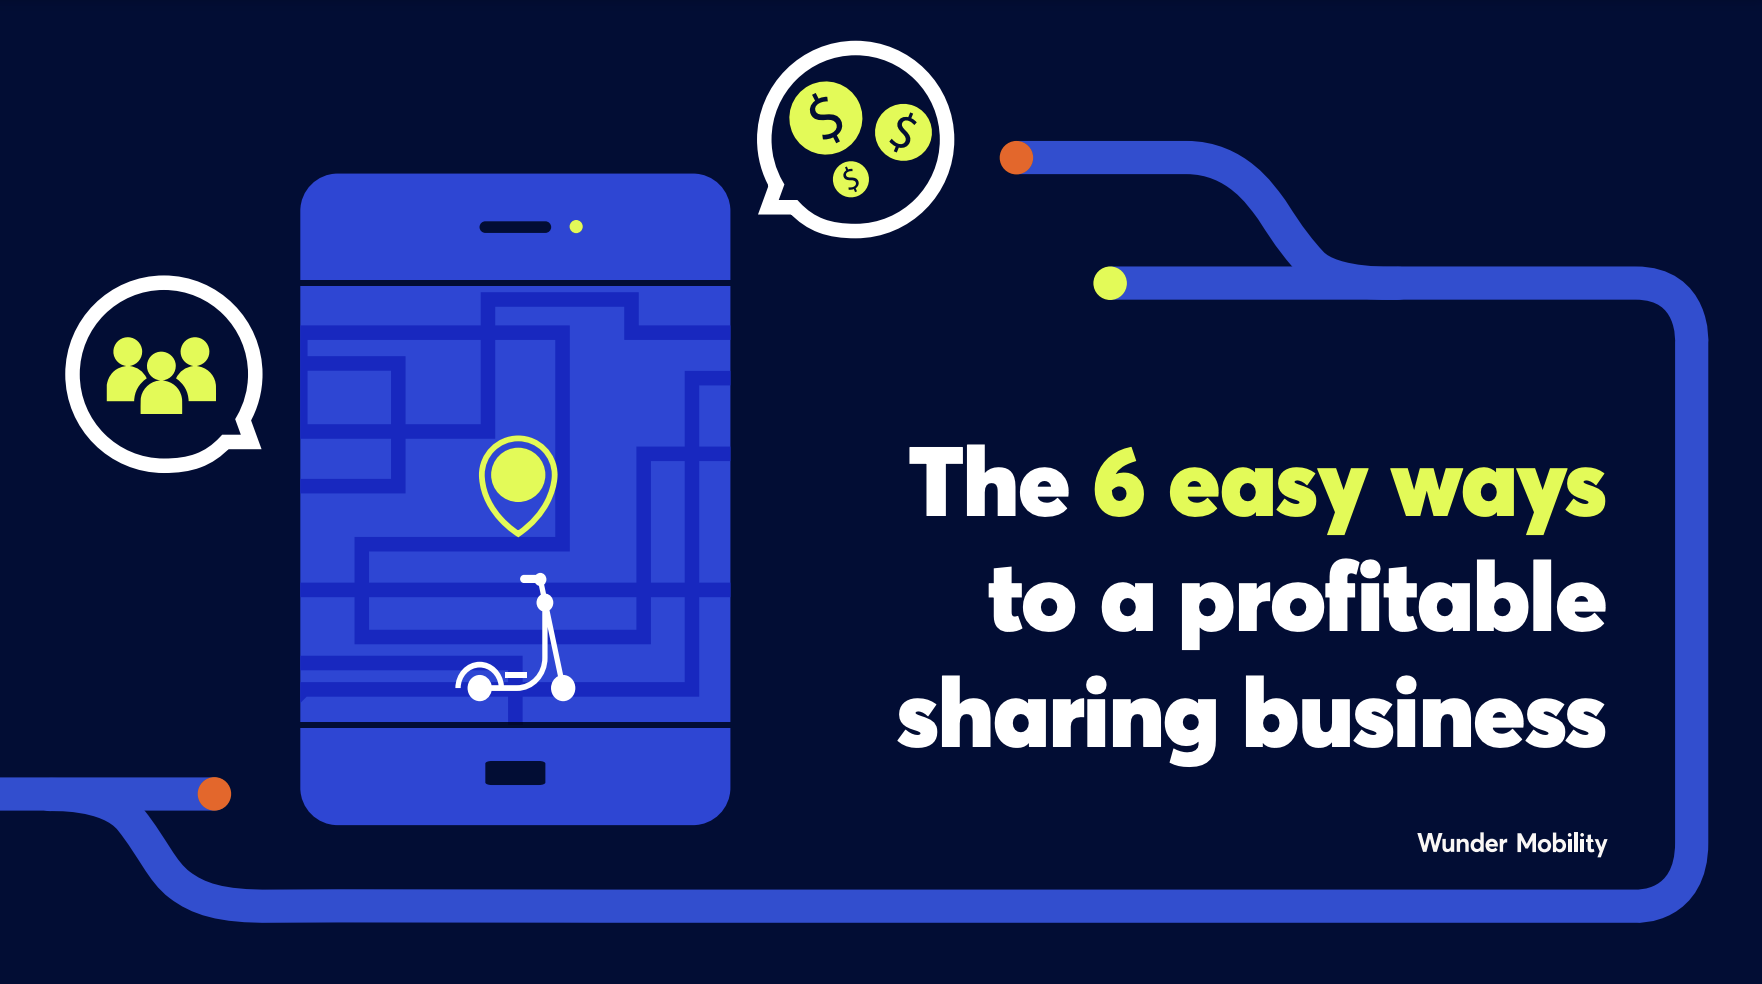 The 6 easy ways to a profitable sharing business